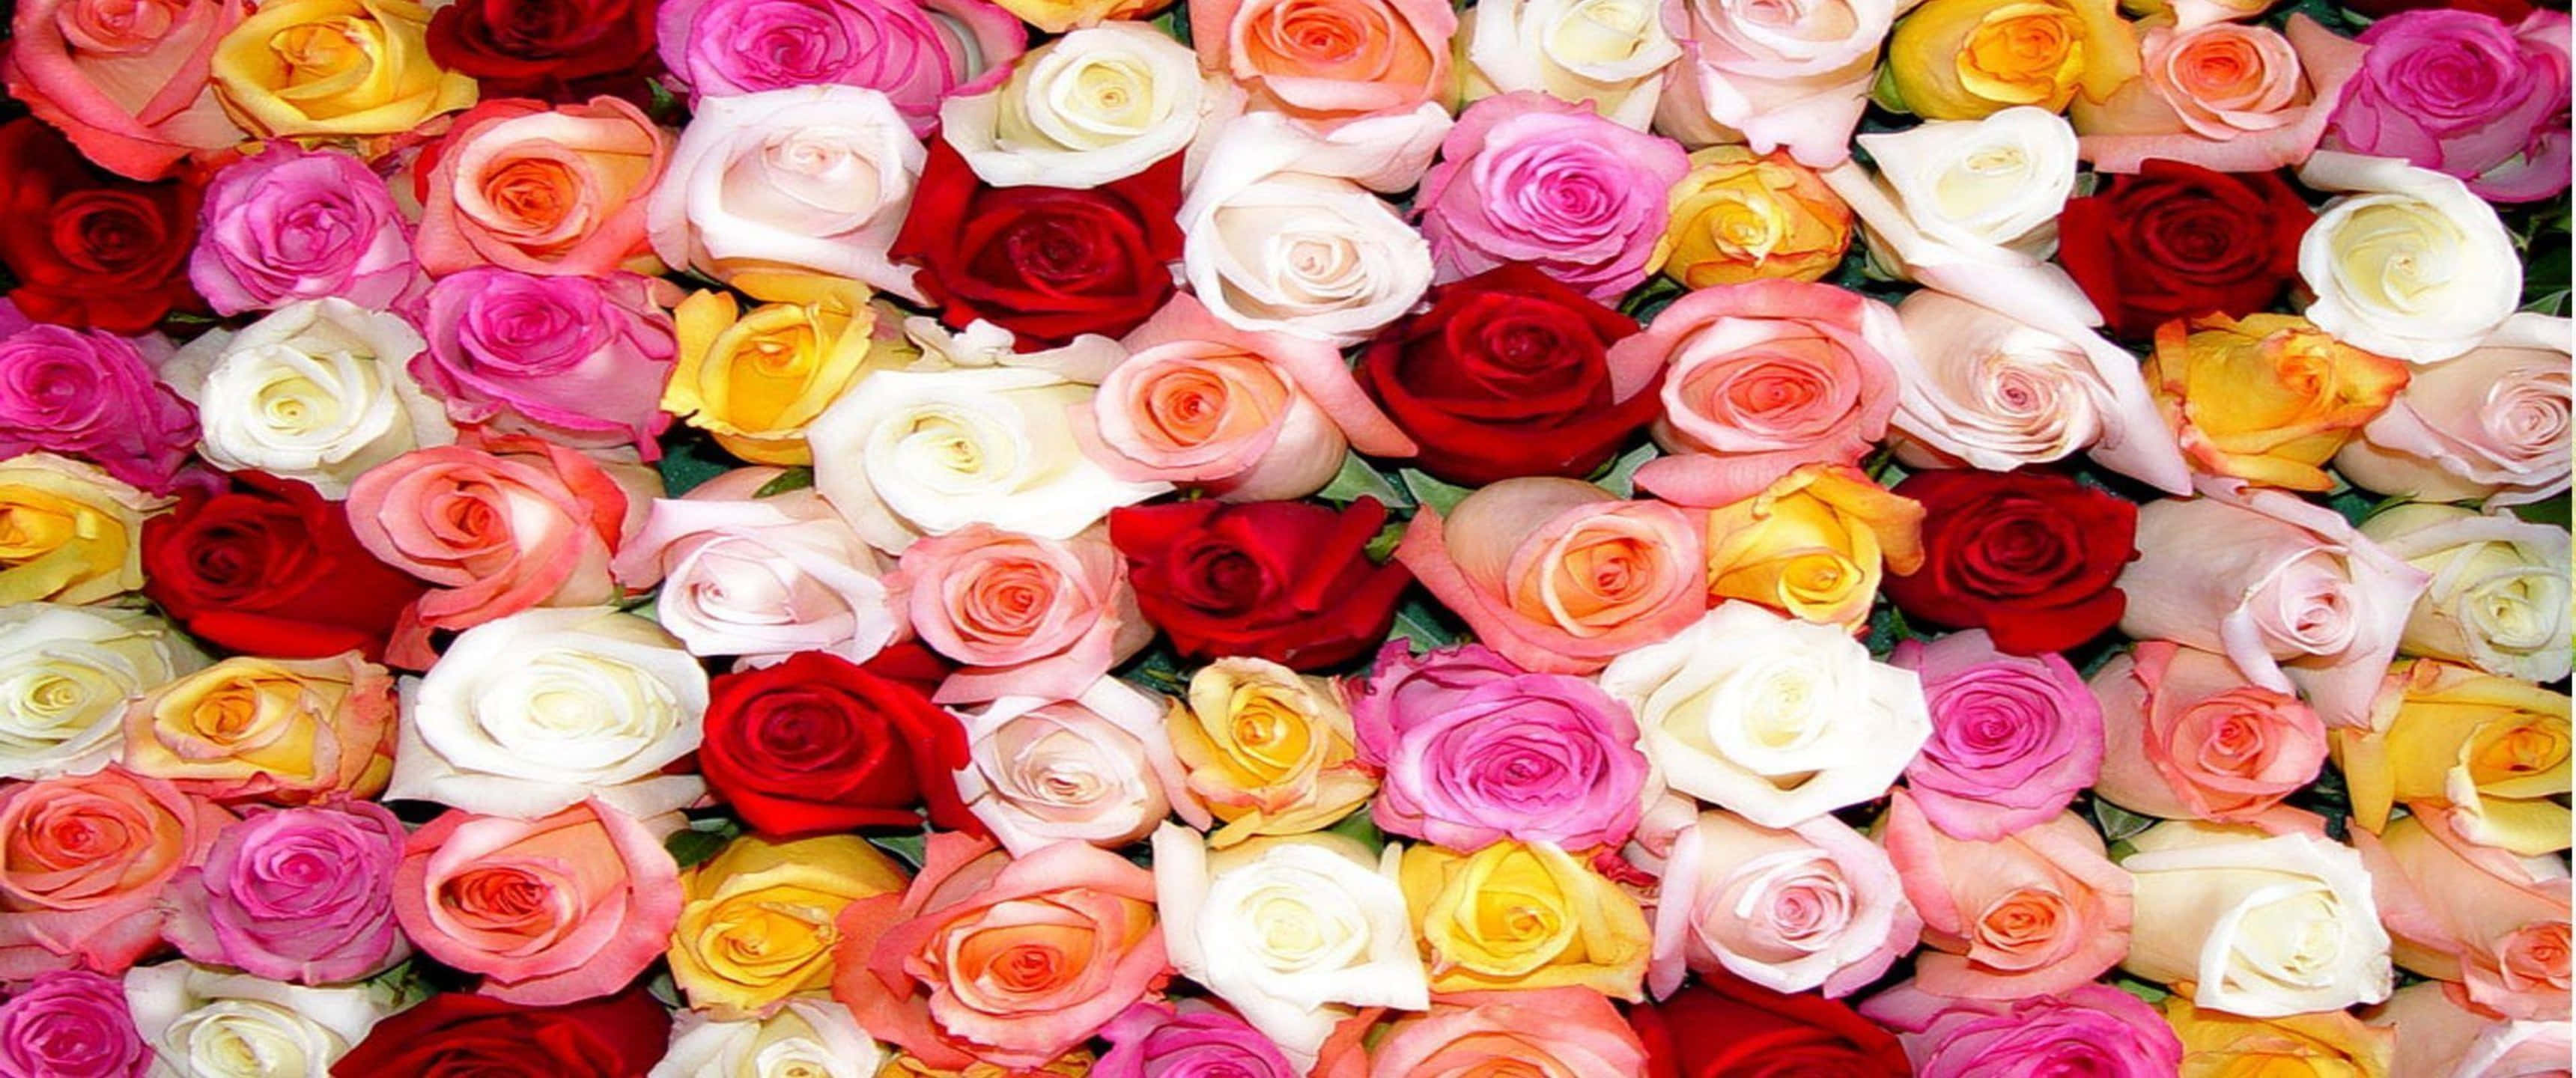 Download 3440x1440p Roses Background | Wallpapers.com